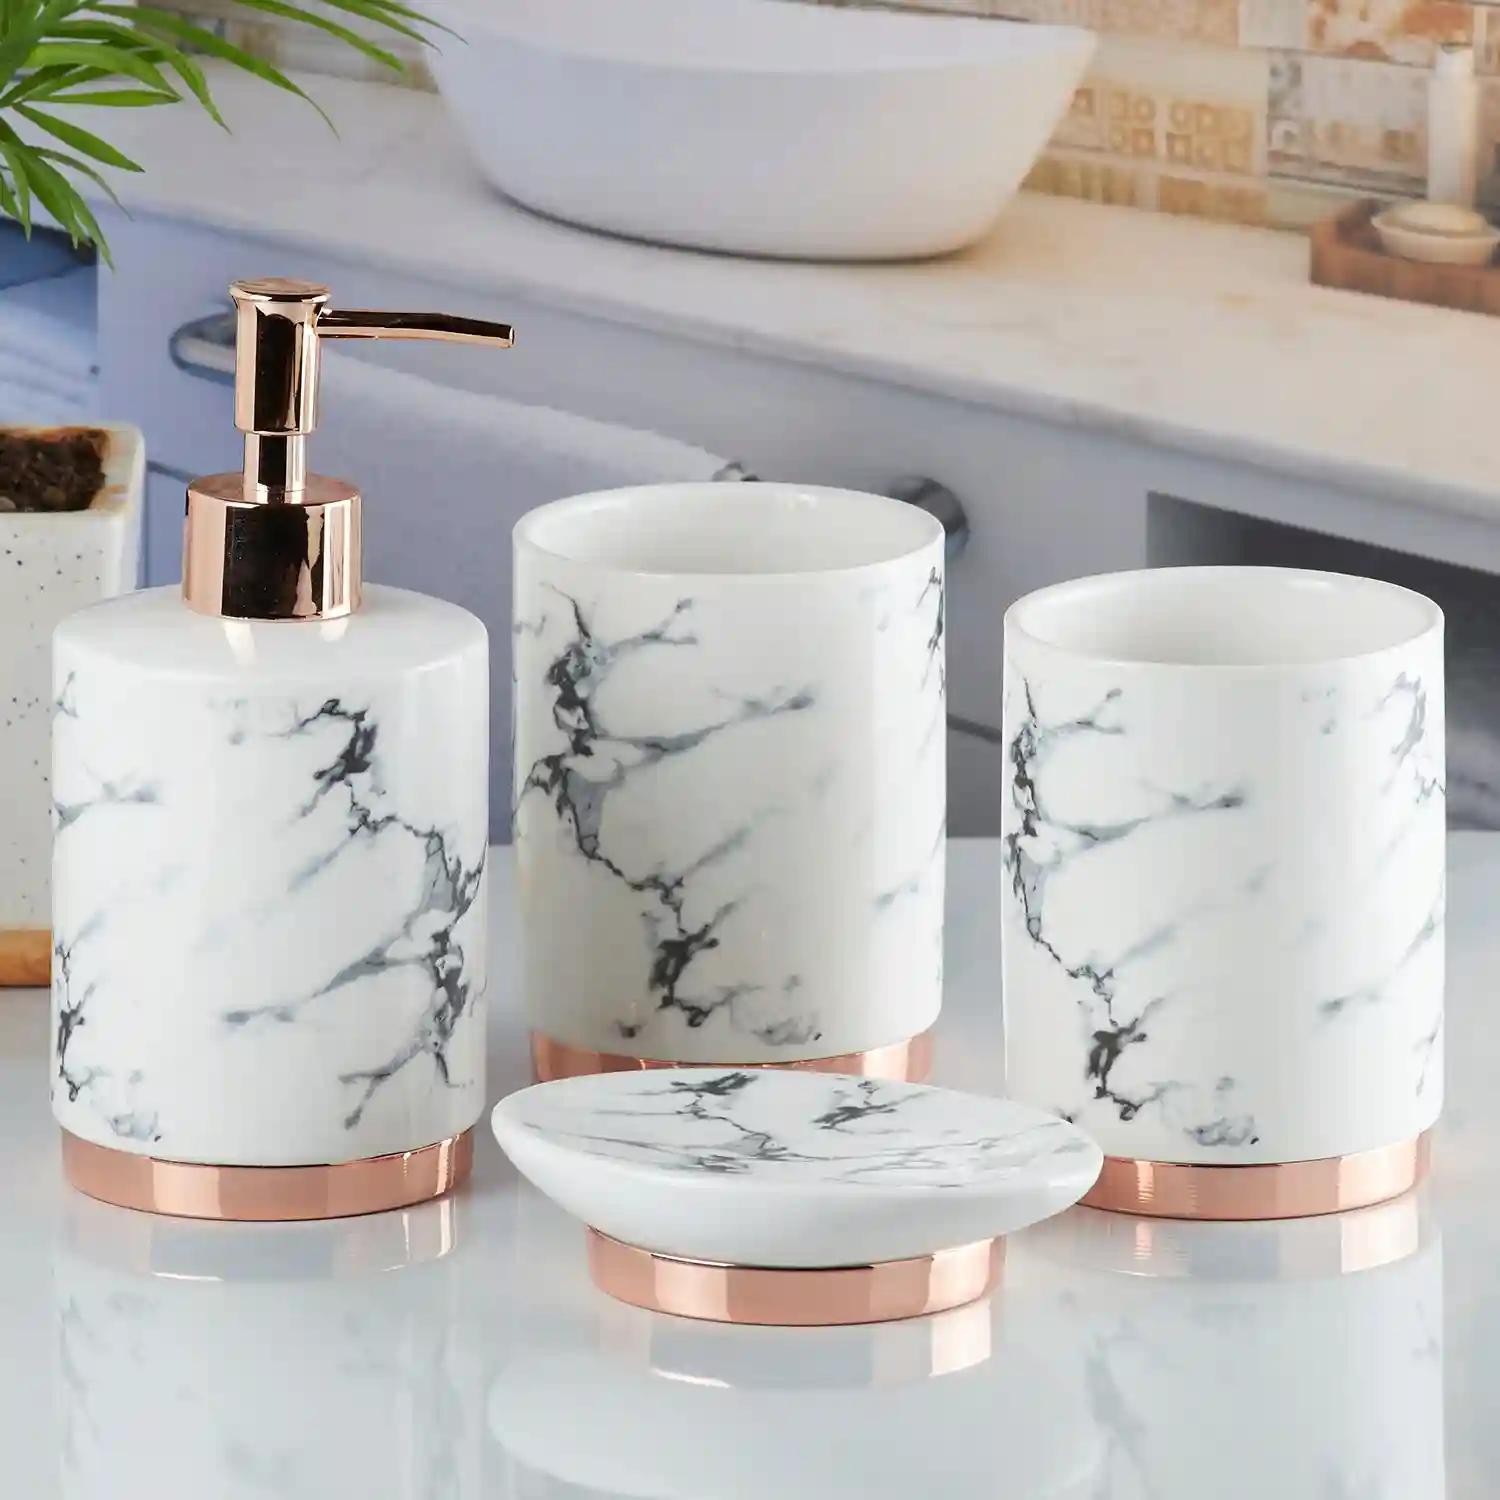 Kookee Ceramic Bathroom Accessories Set of 4, Modern Bath Set with Liquid handwash Soap Dispenser and Toothbrush holder, Luxury Gift Accessory for Home - White (9600)